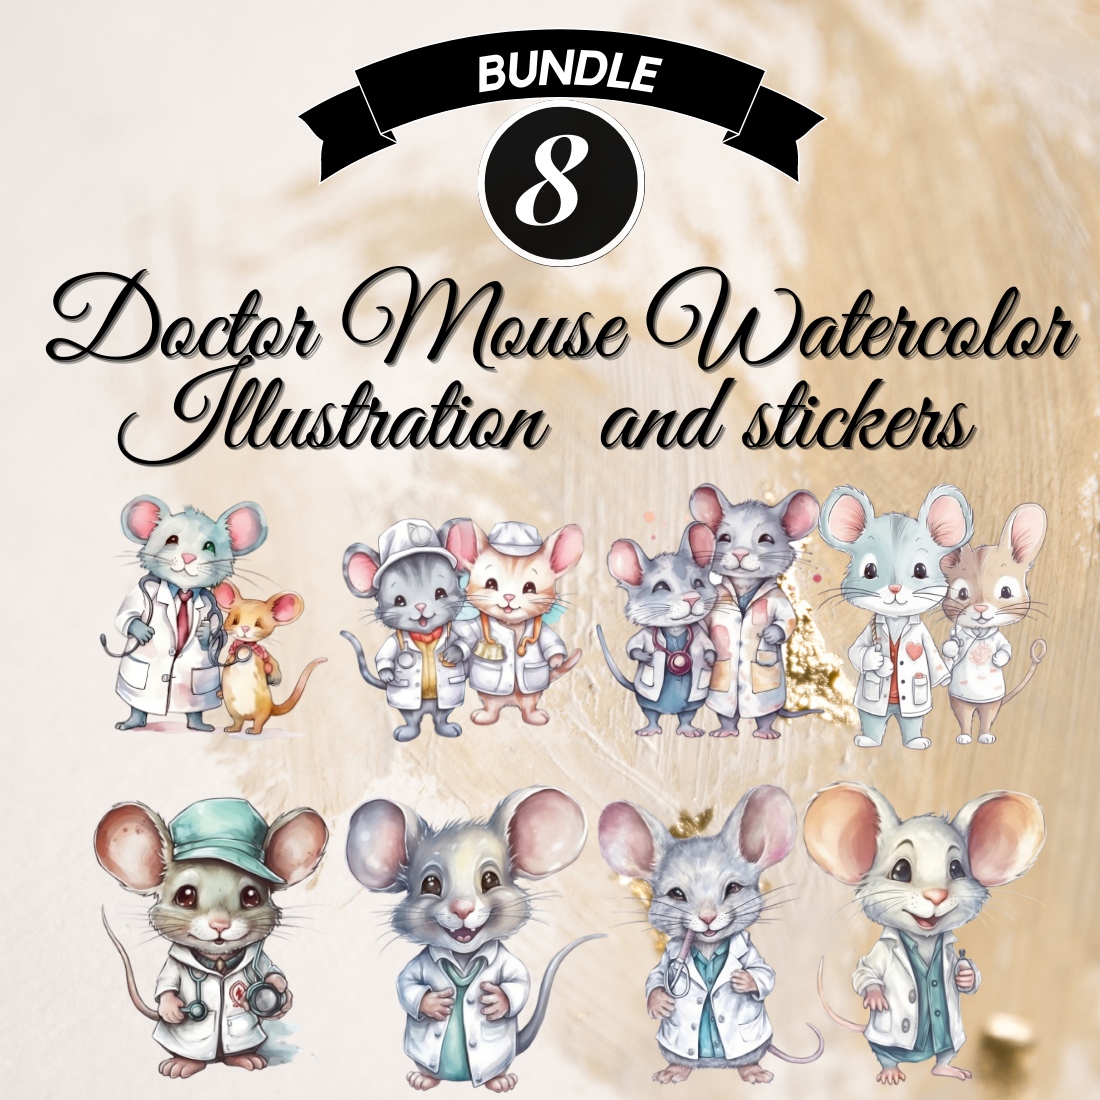 Doctor Mouse Watercolor Illustration and stickers cover image.